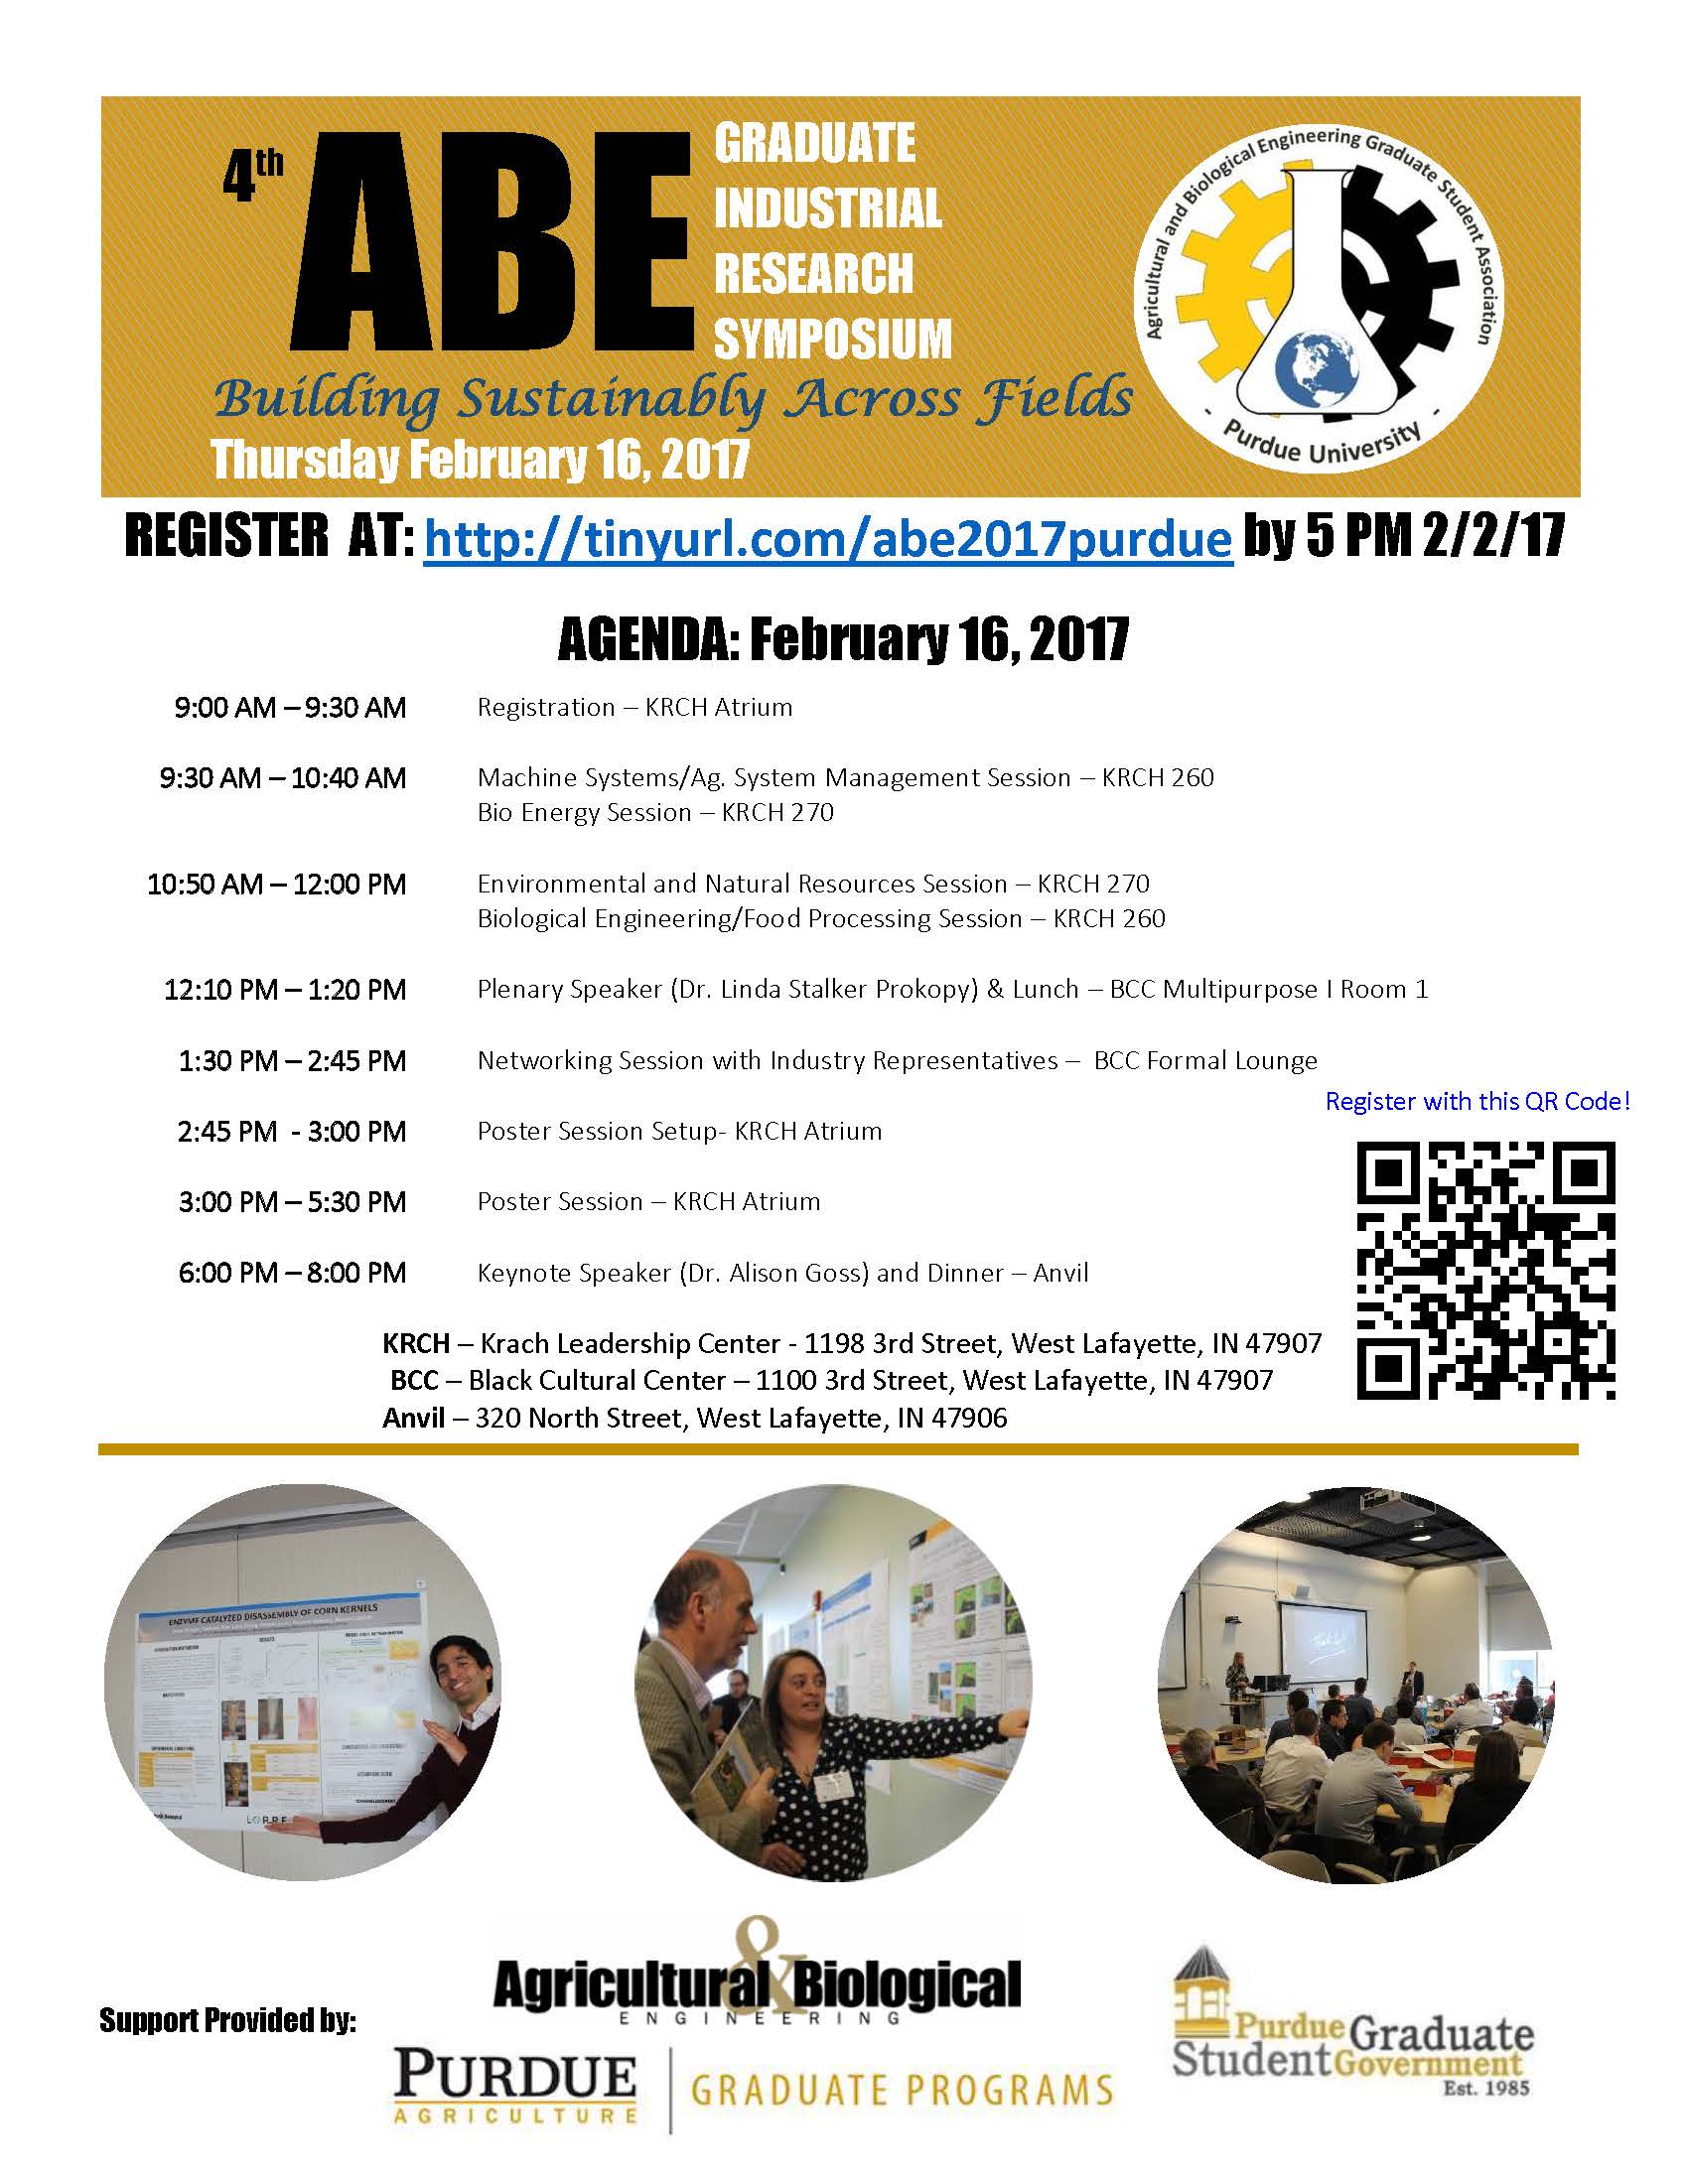 ABE Symposium flier and times